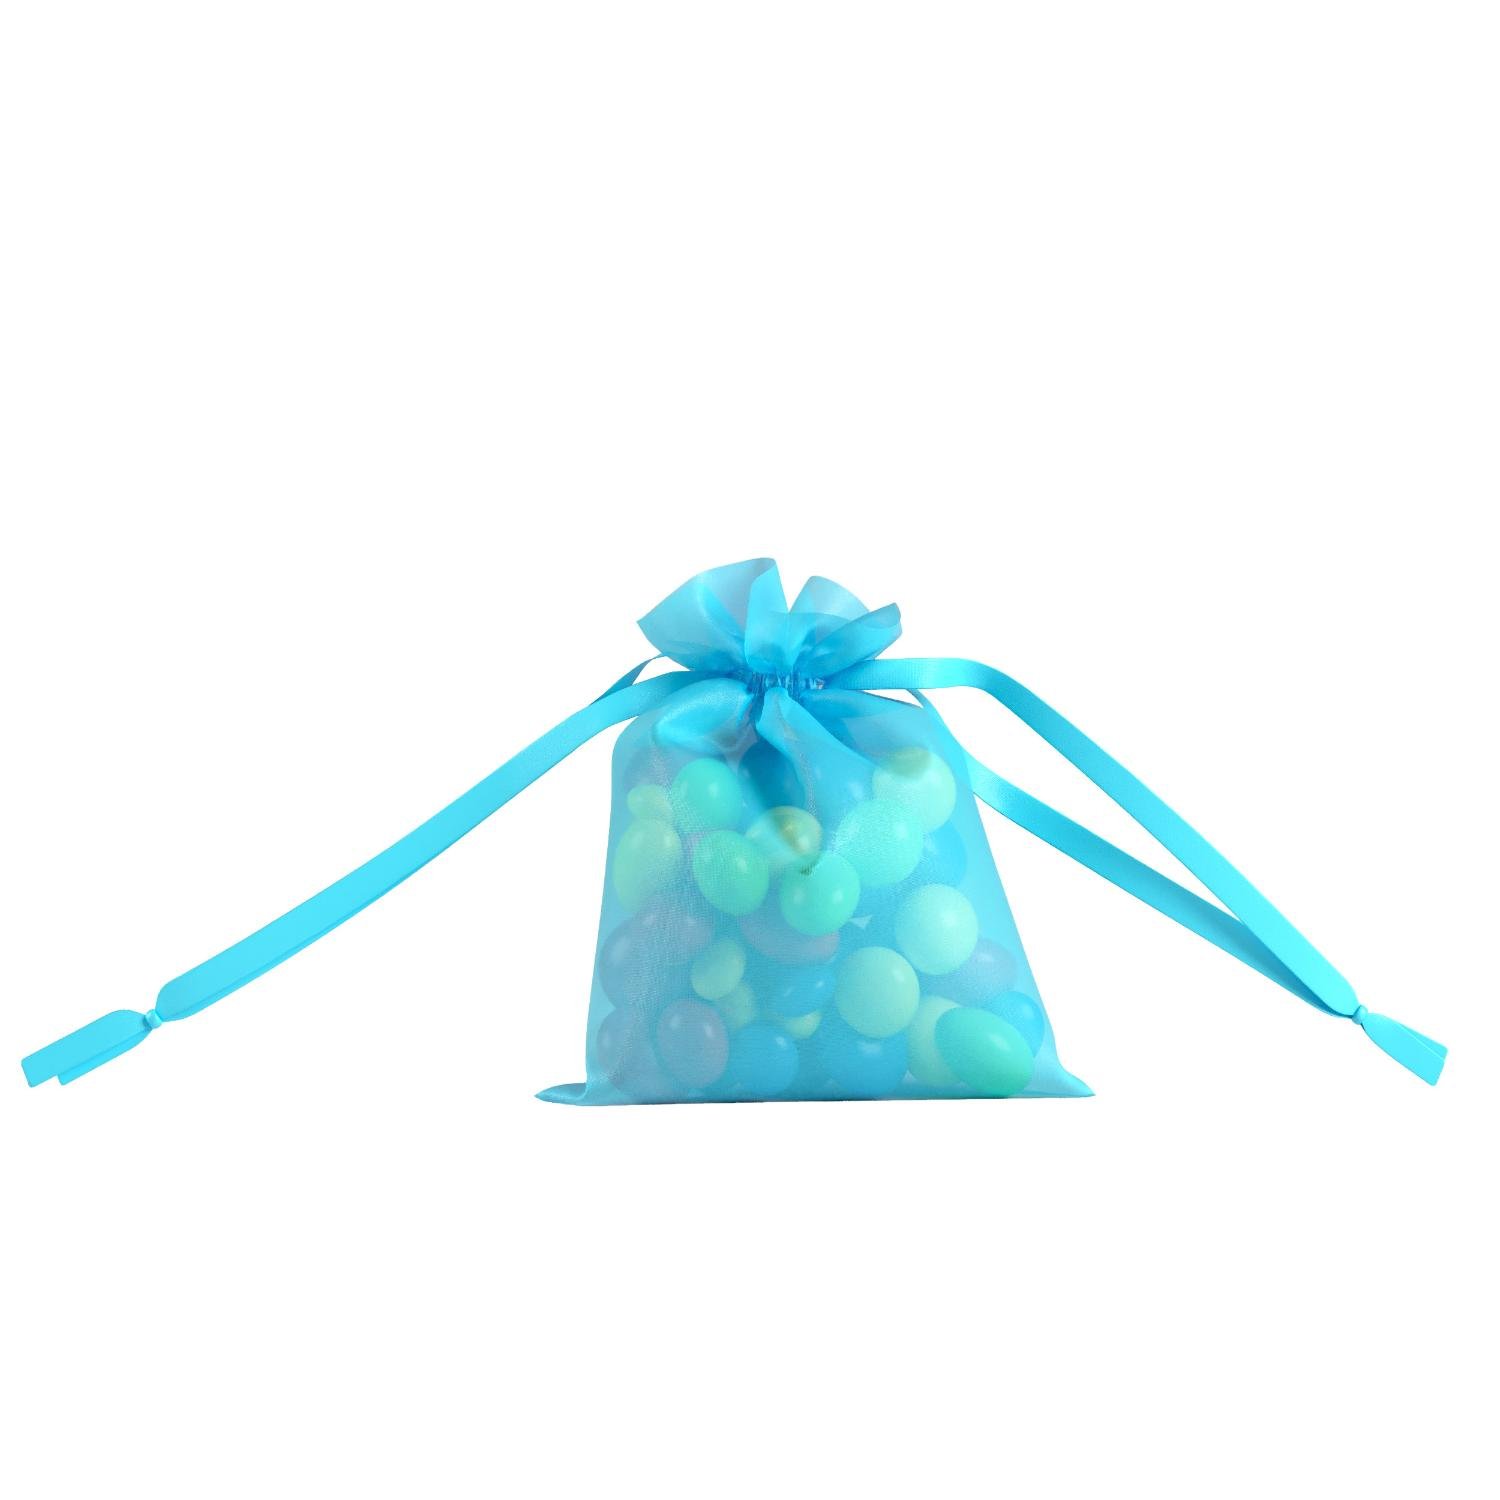 4in. x 5in. Turquoise Sheer Organza Pouch (12)